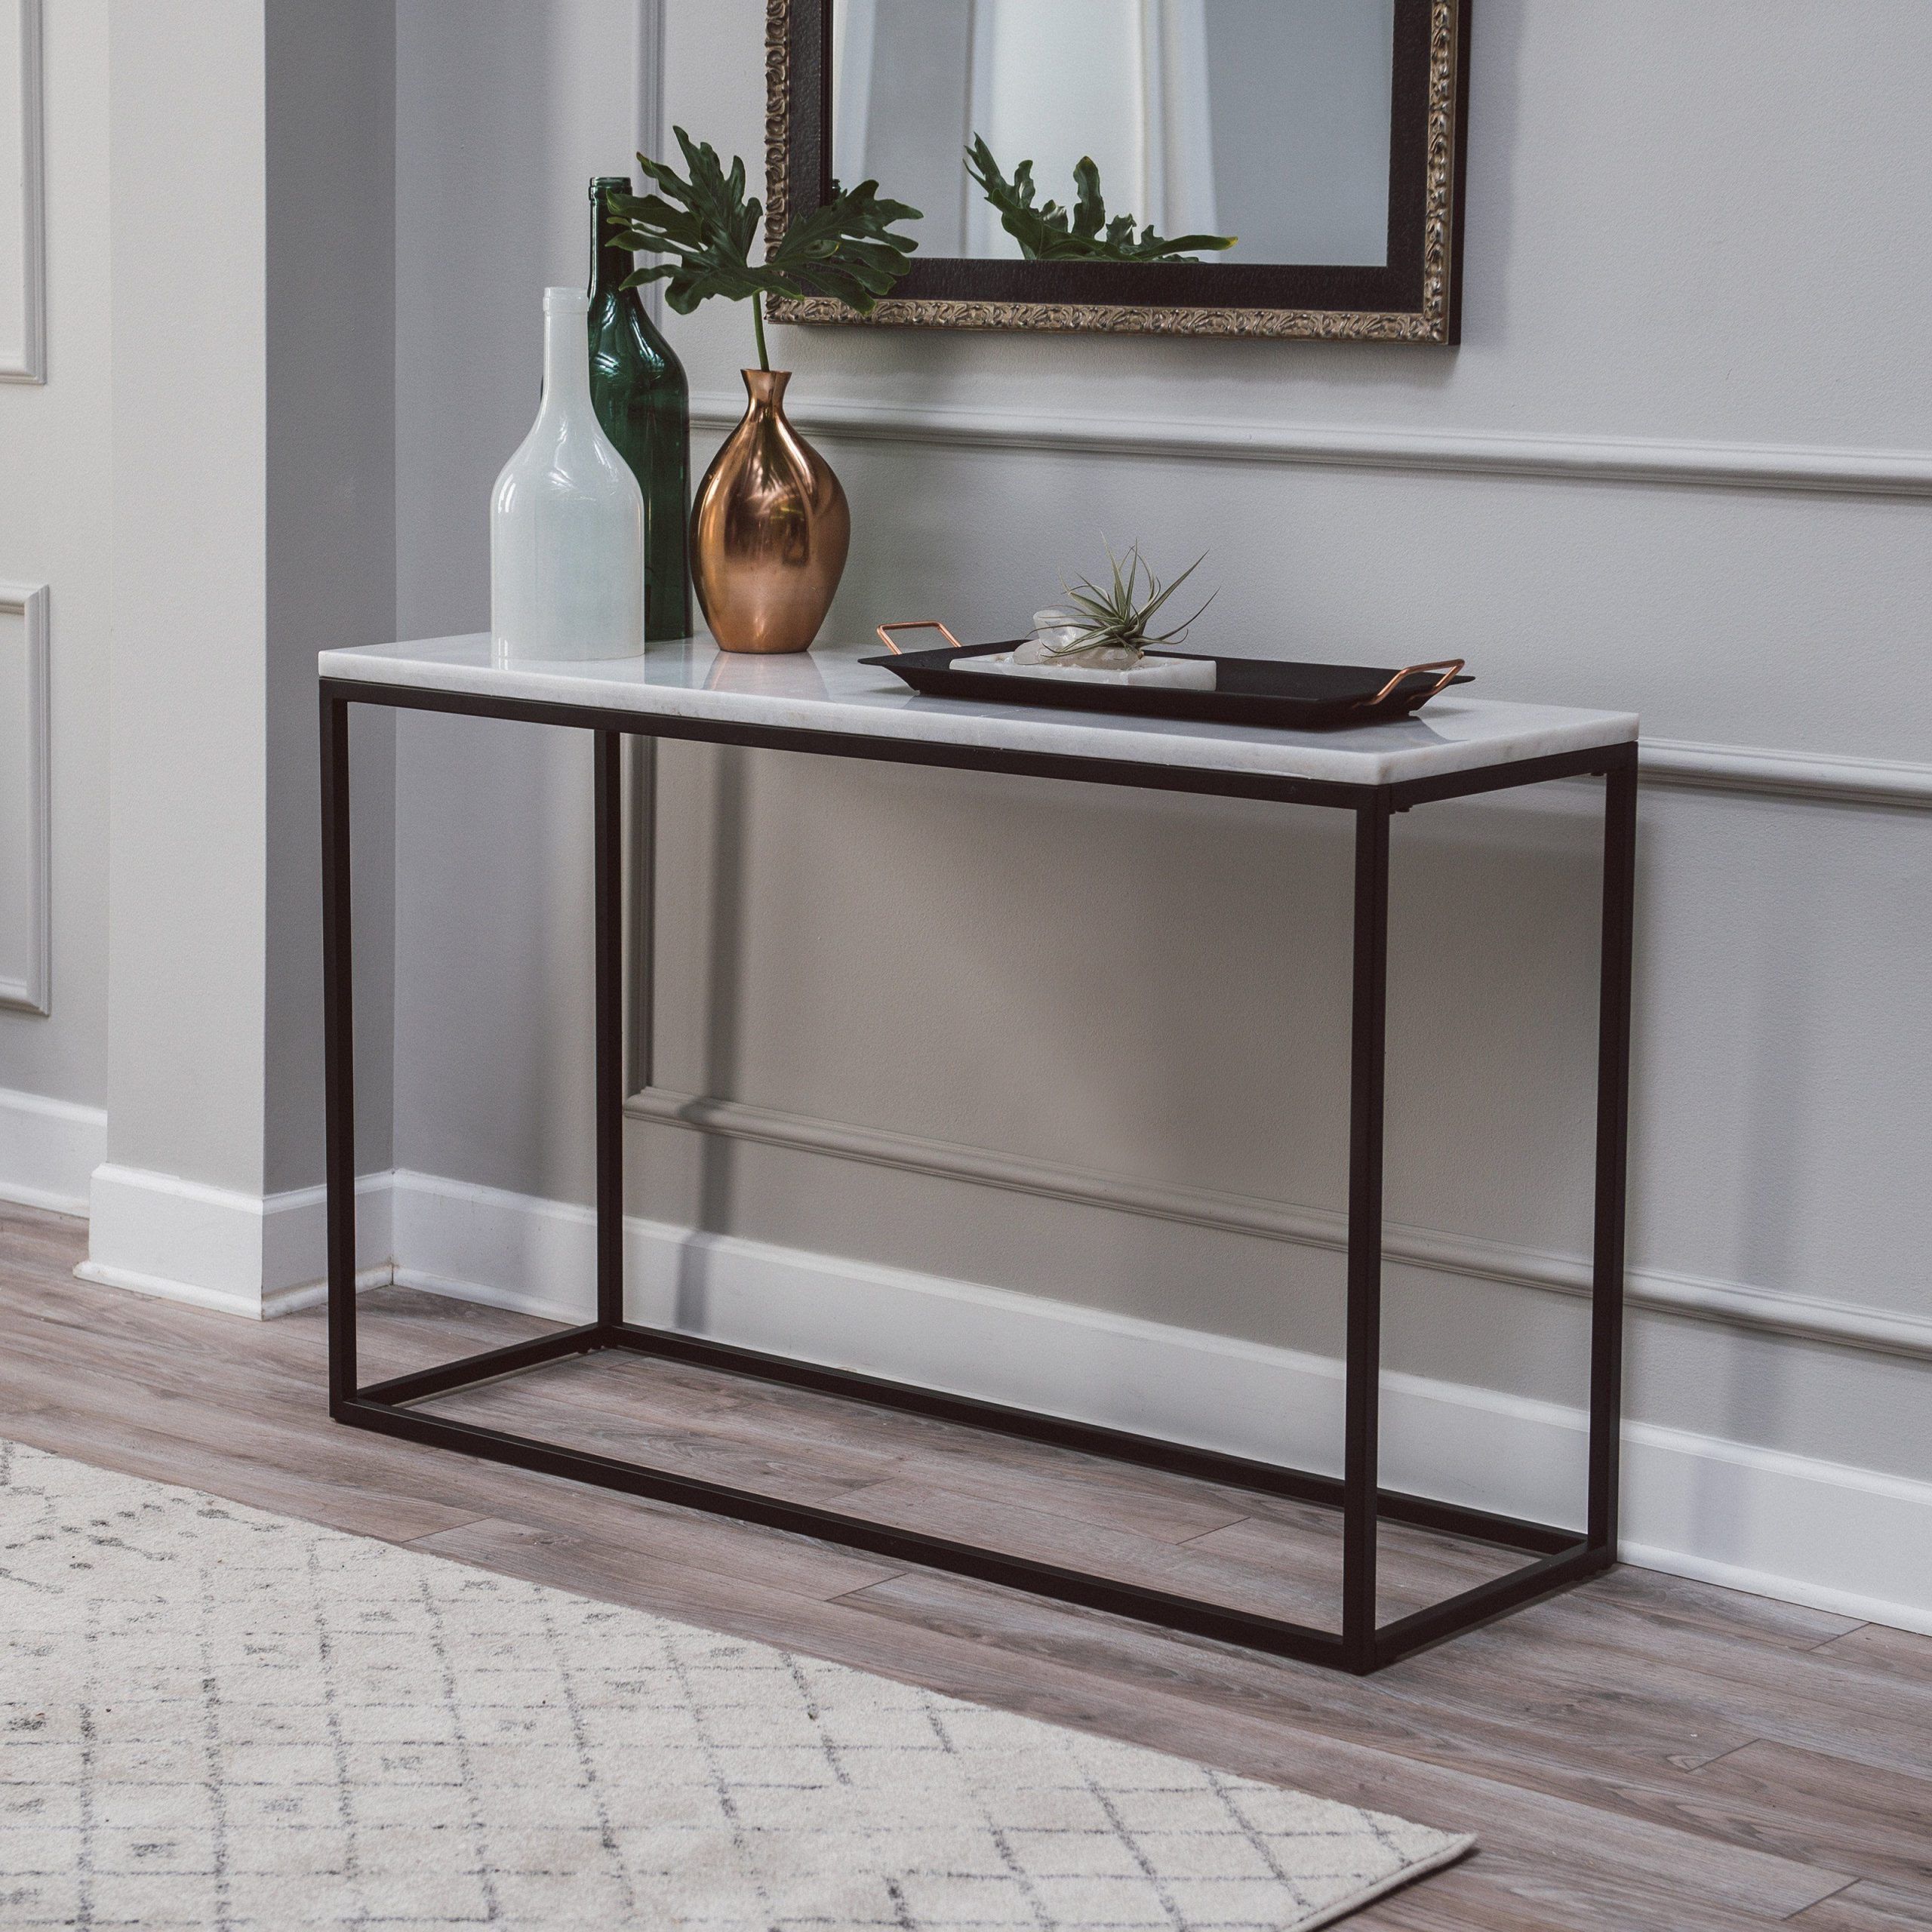 Belham Living Sorenson Console Table With Marble Top | From Hayneedle Throughout Marble Console Tables Set Of  (View 5 of 20)